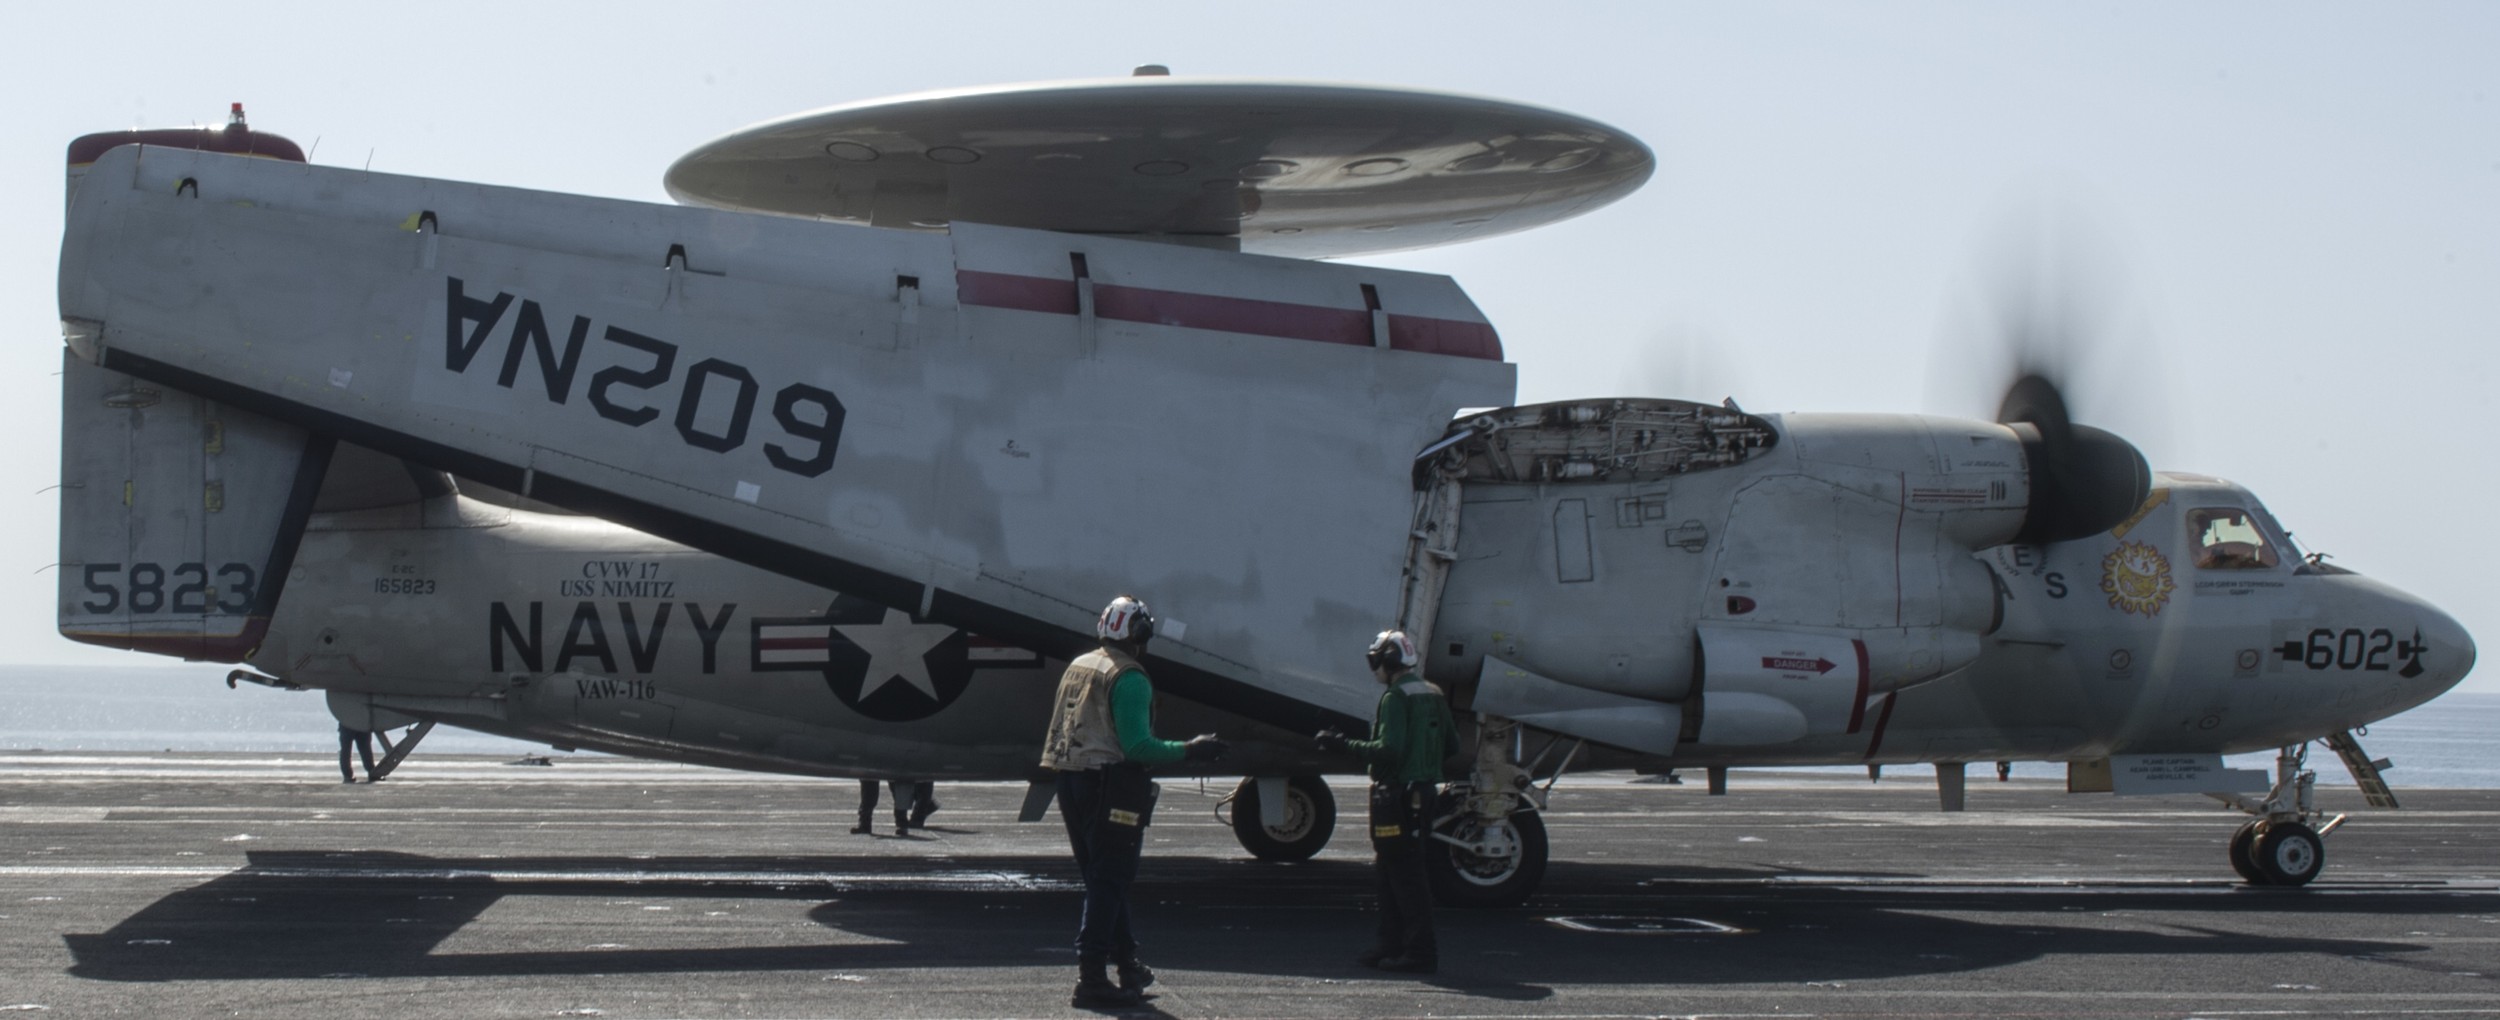 vaw-116 sun kings airborne command control squadron carrier early warning cvw-17 uss nimitz cvn-68 105